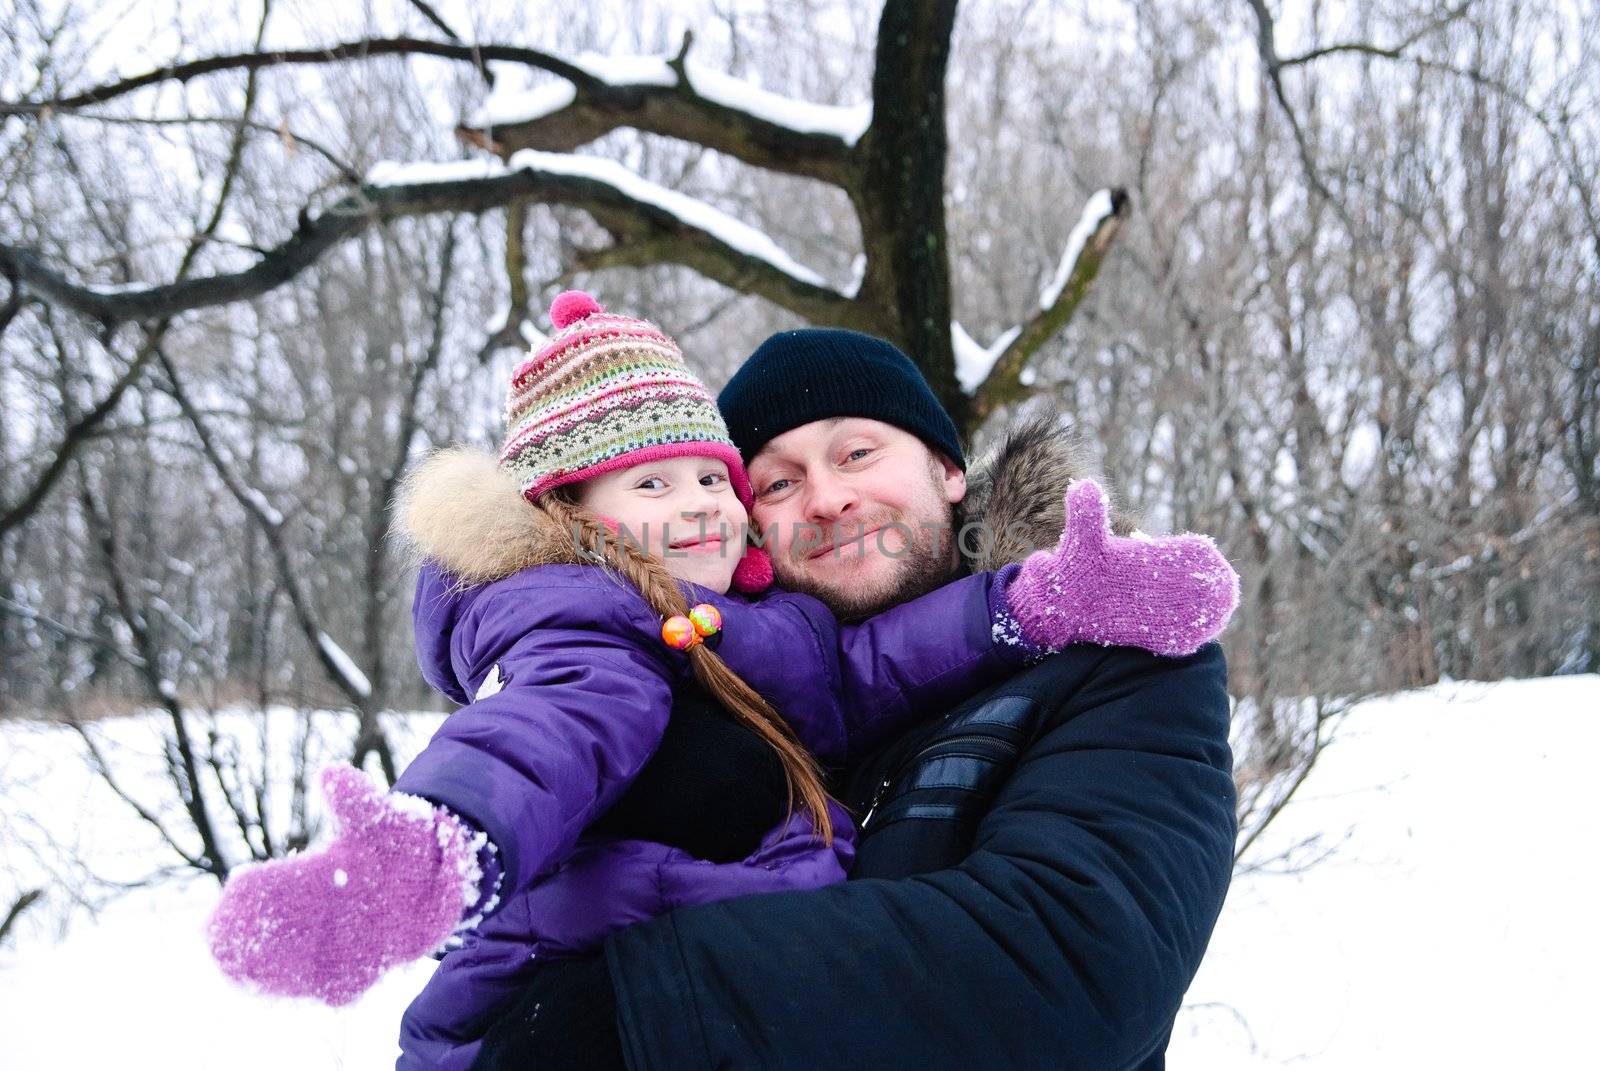 father and daughter in winter clothing in a winter woods